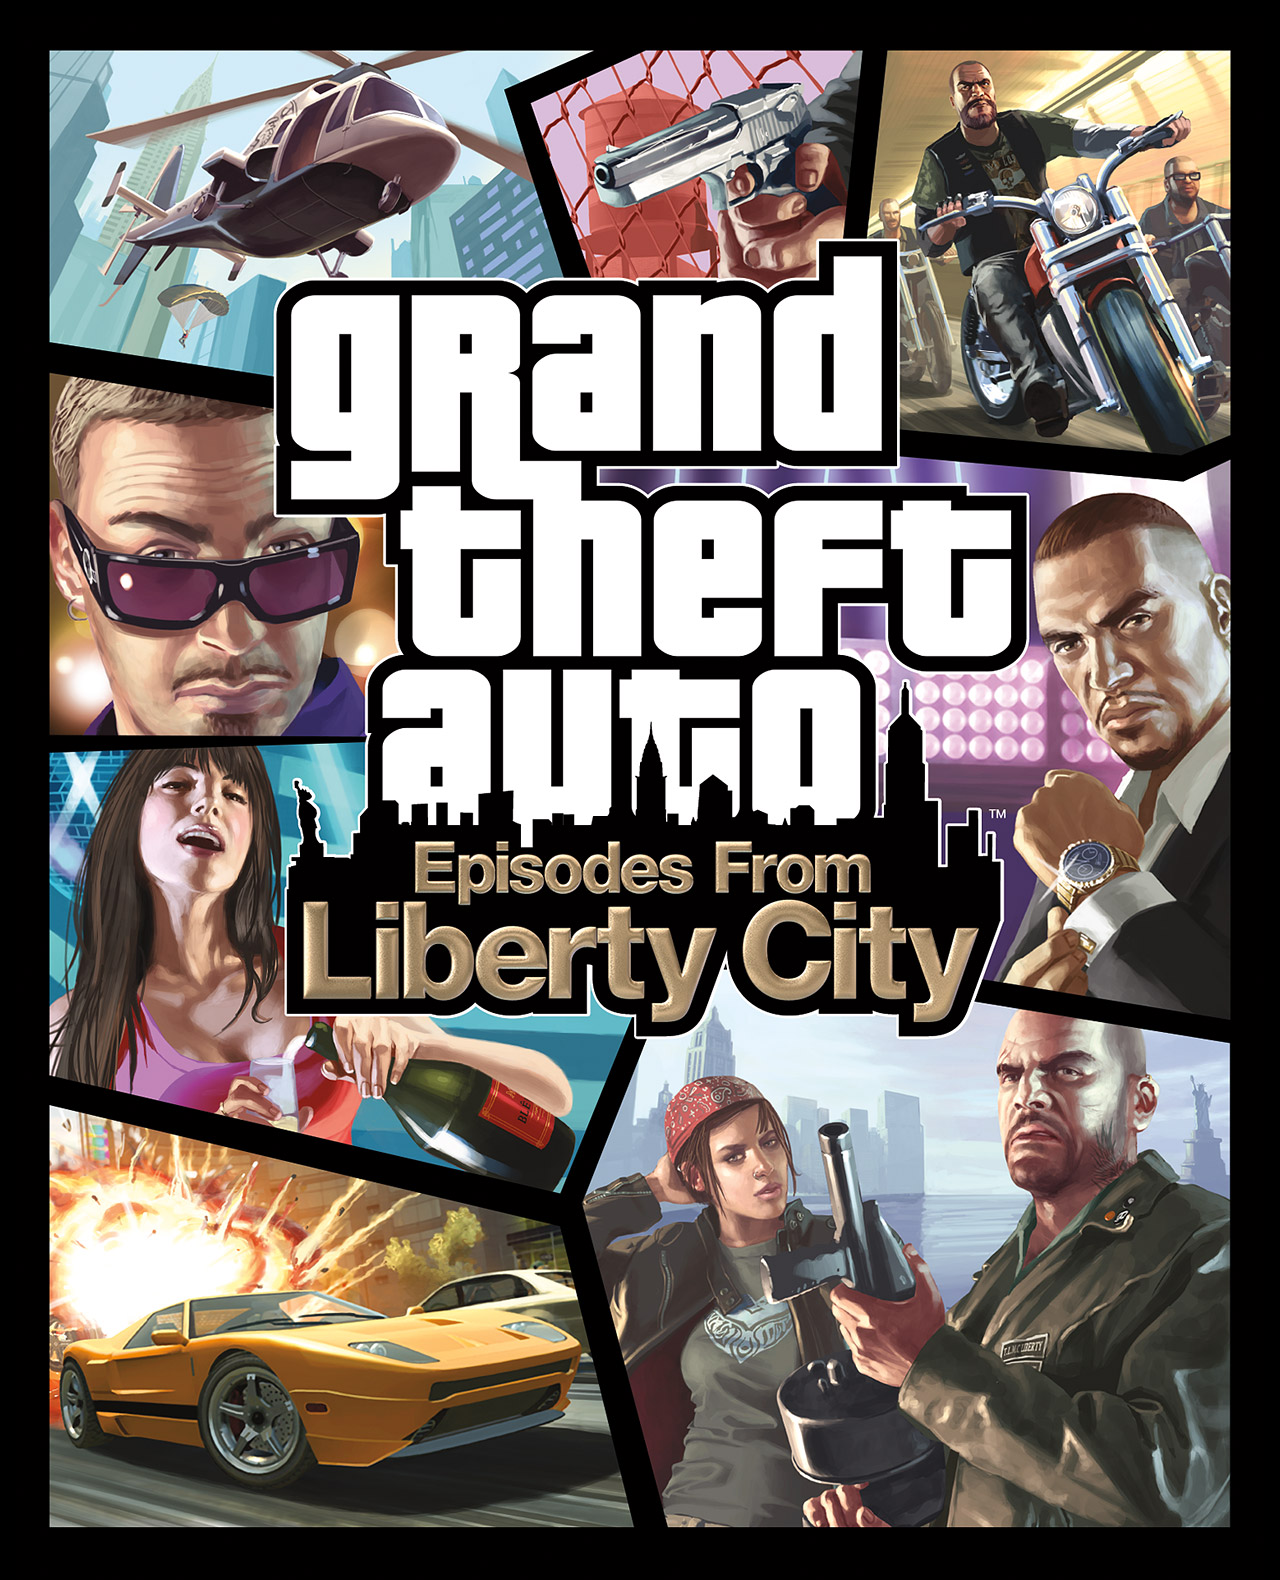 Grand theft auto iv episodes from liberty city save game pc